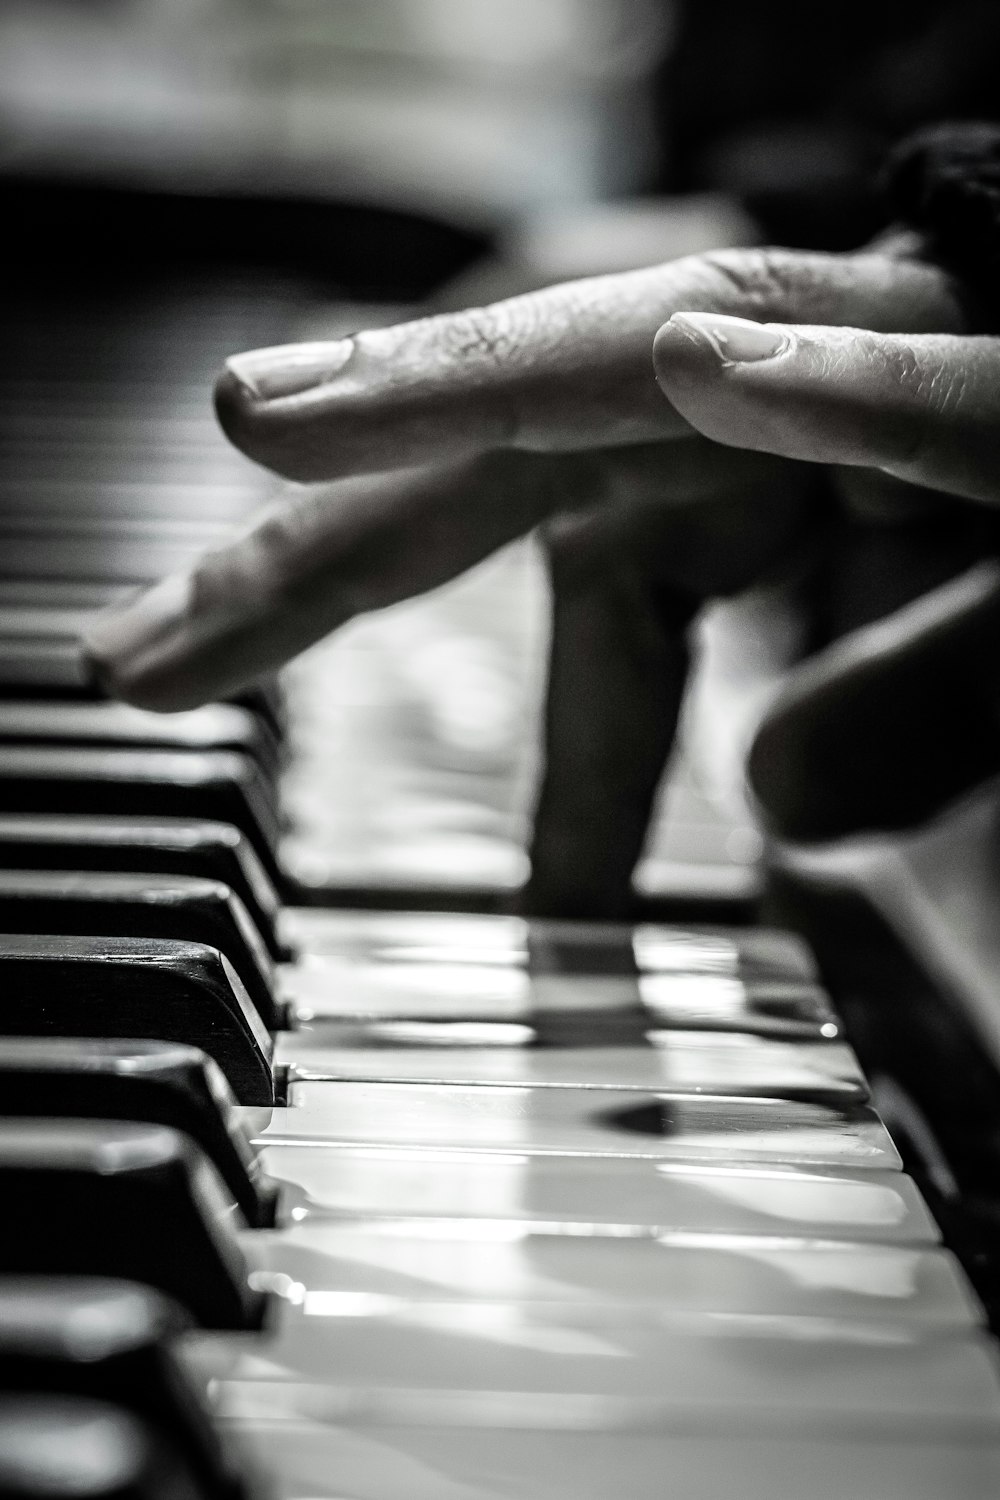 a close up of a person's hands on a piano